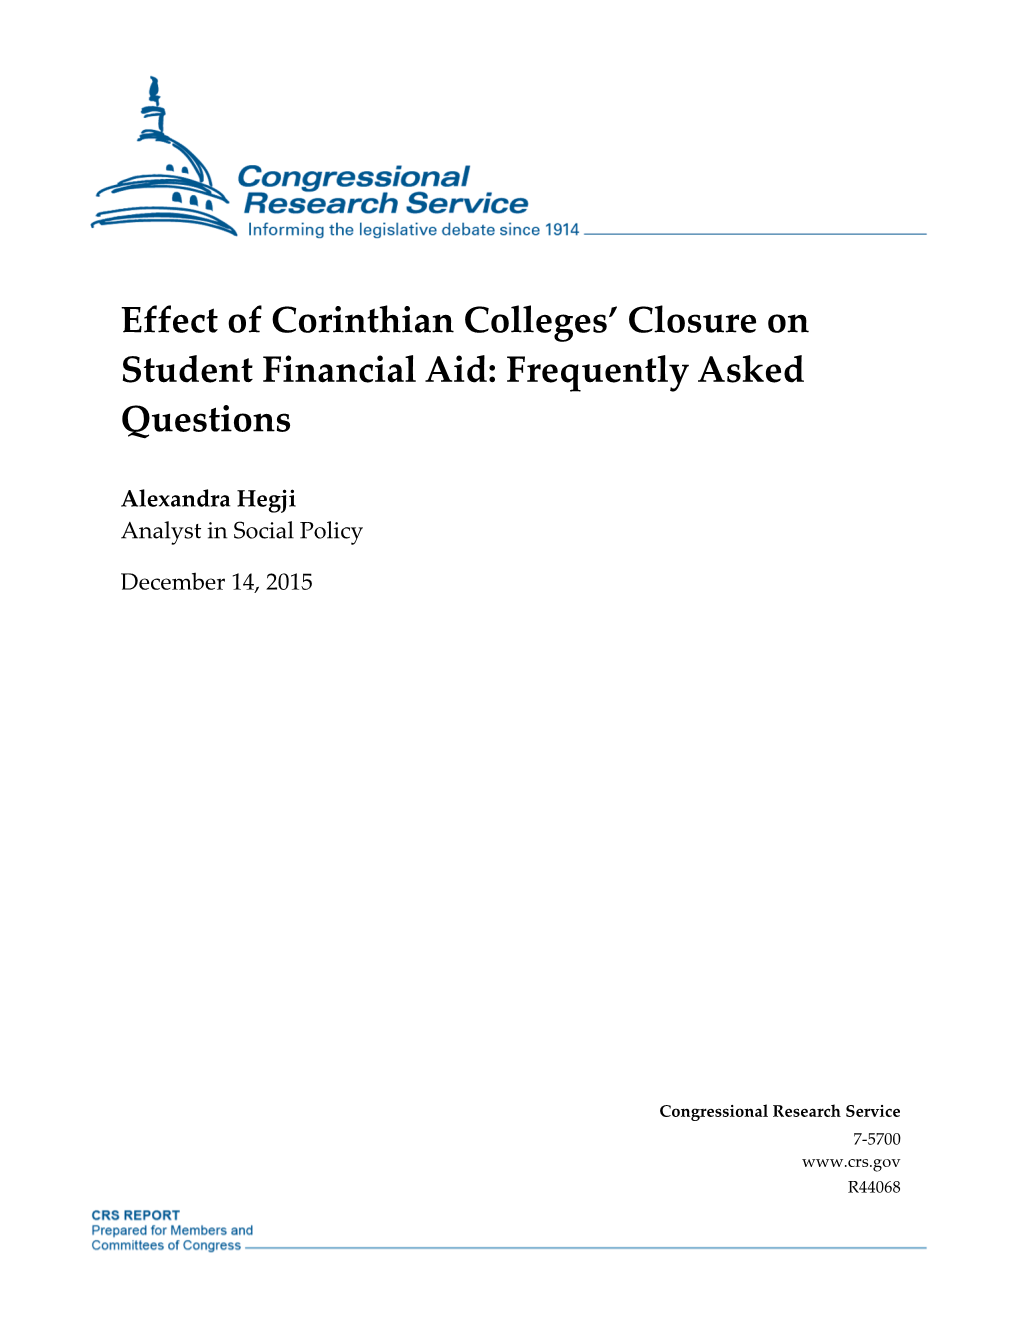 Effect of Corinthian Colleges' Closure on Student Financial